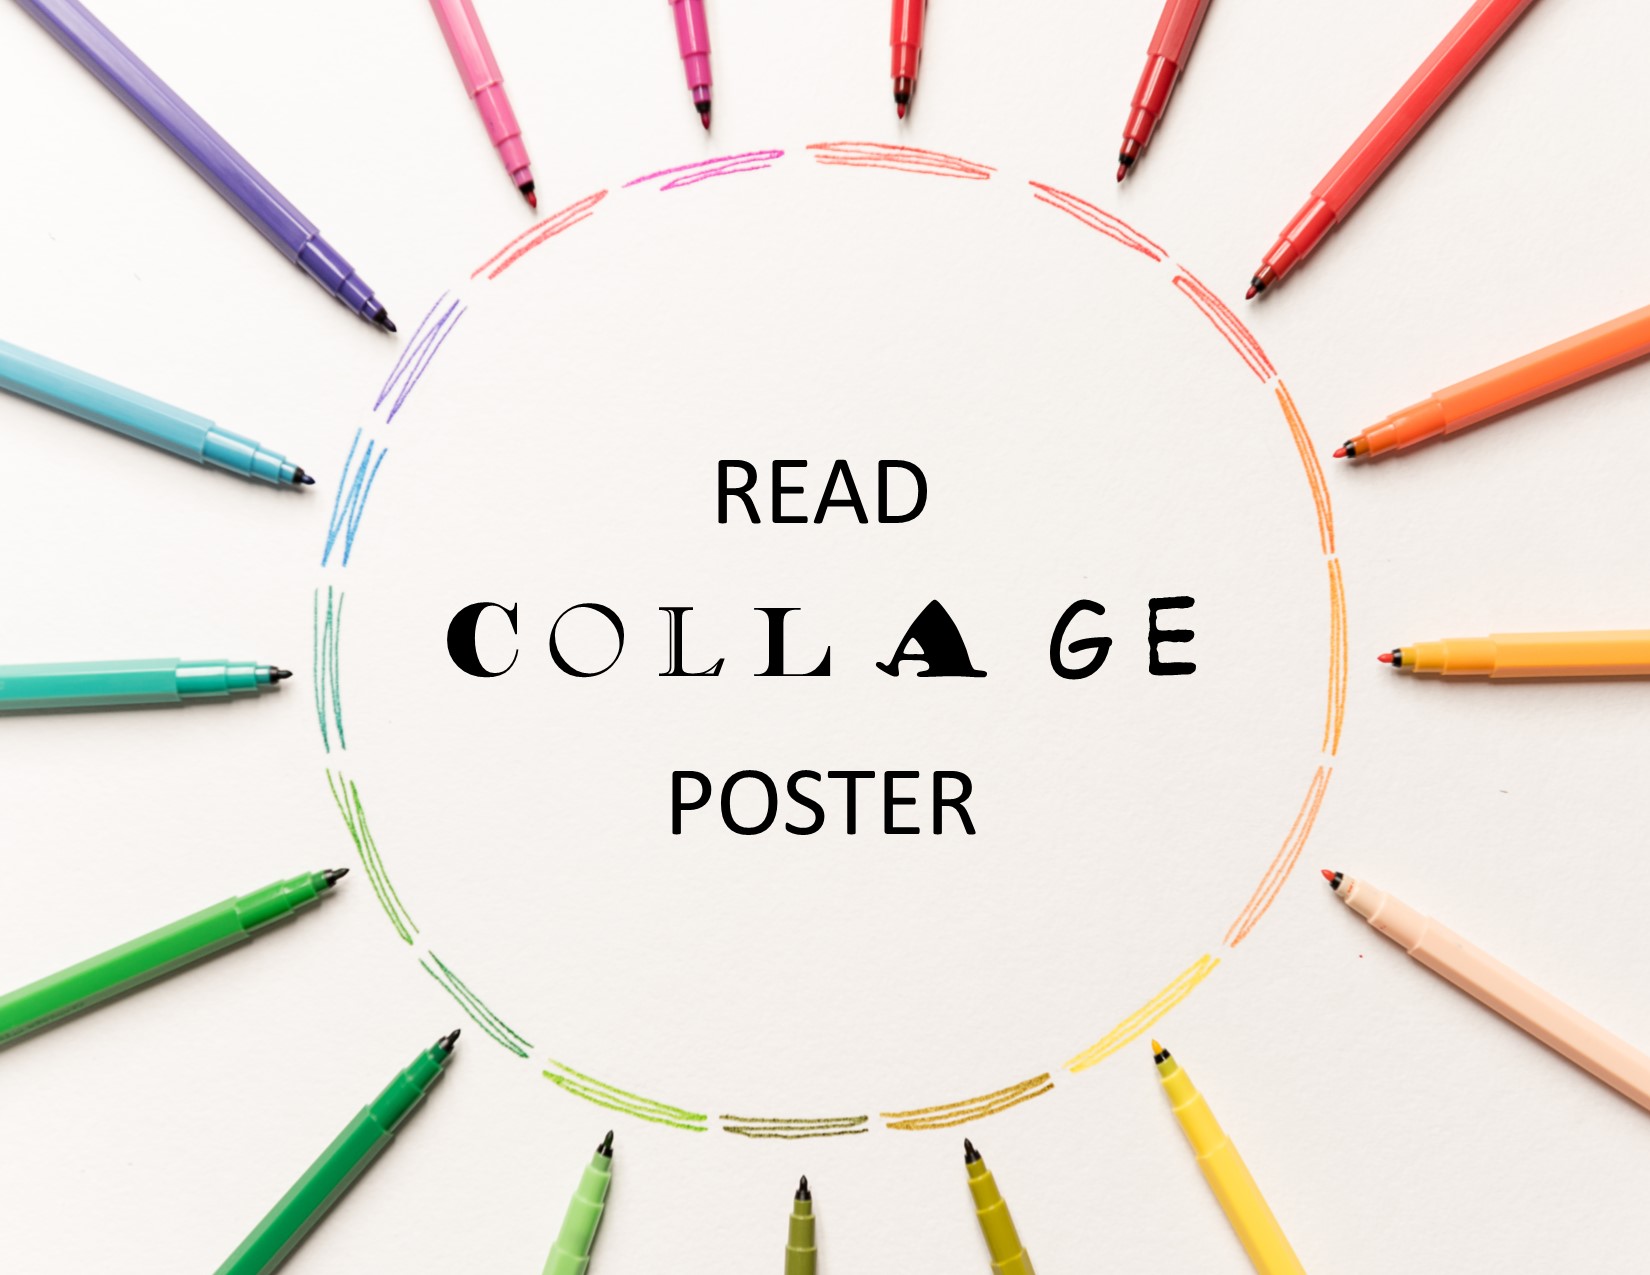 READ collage poster